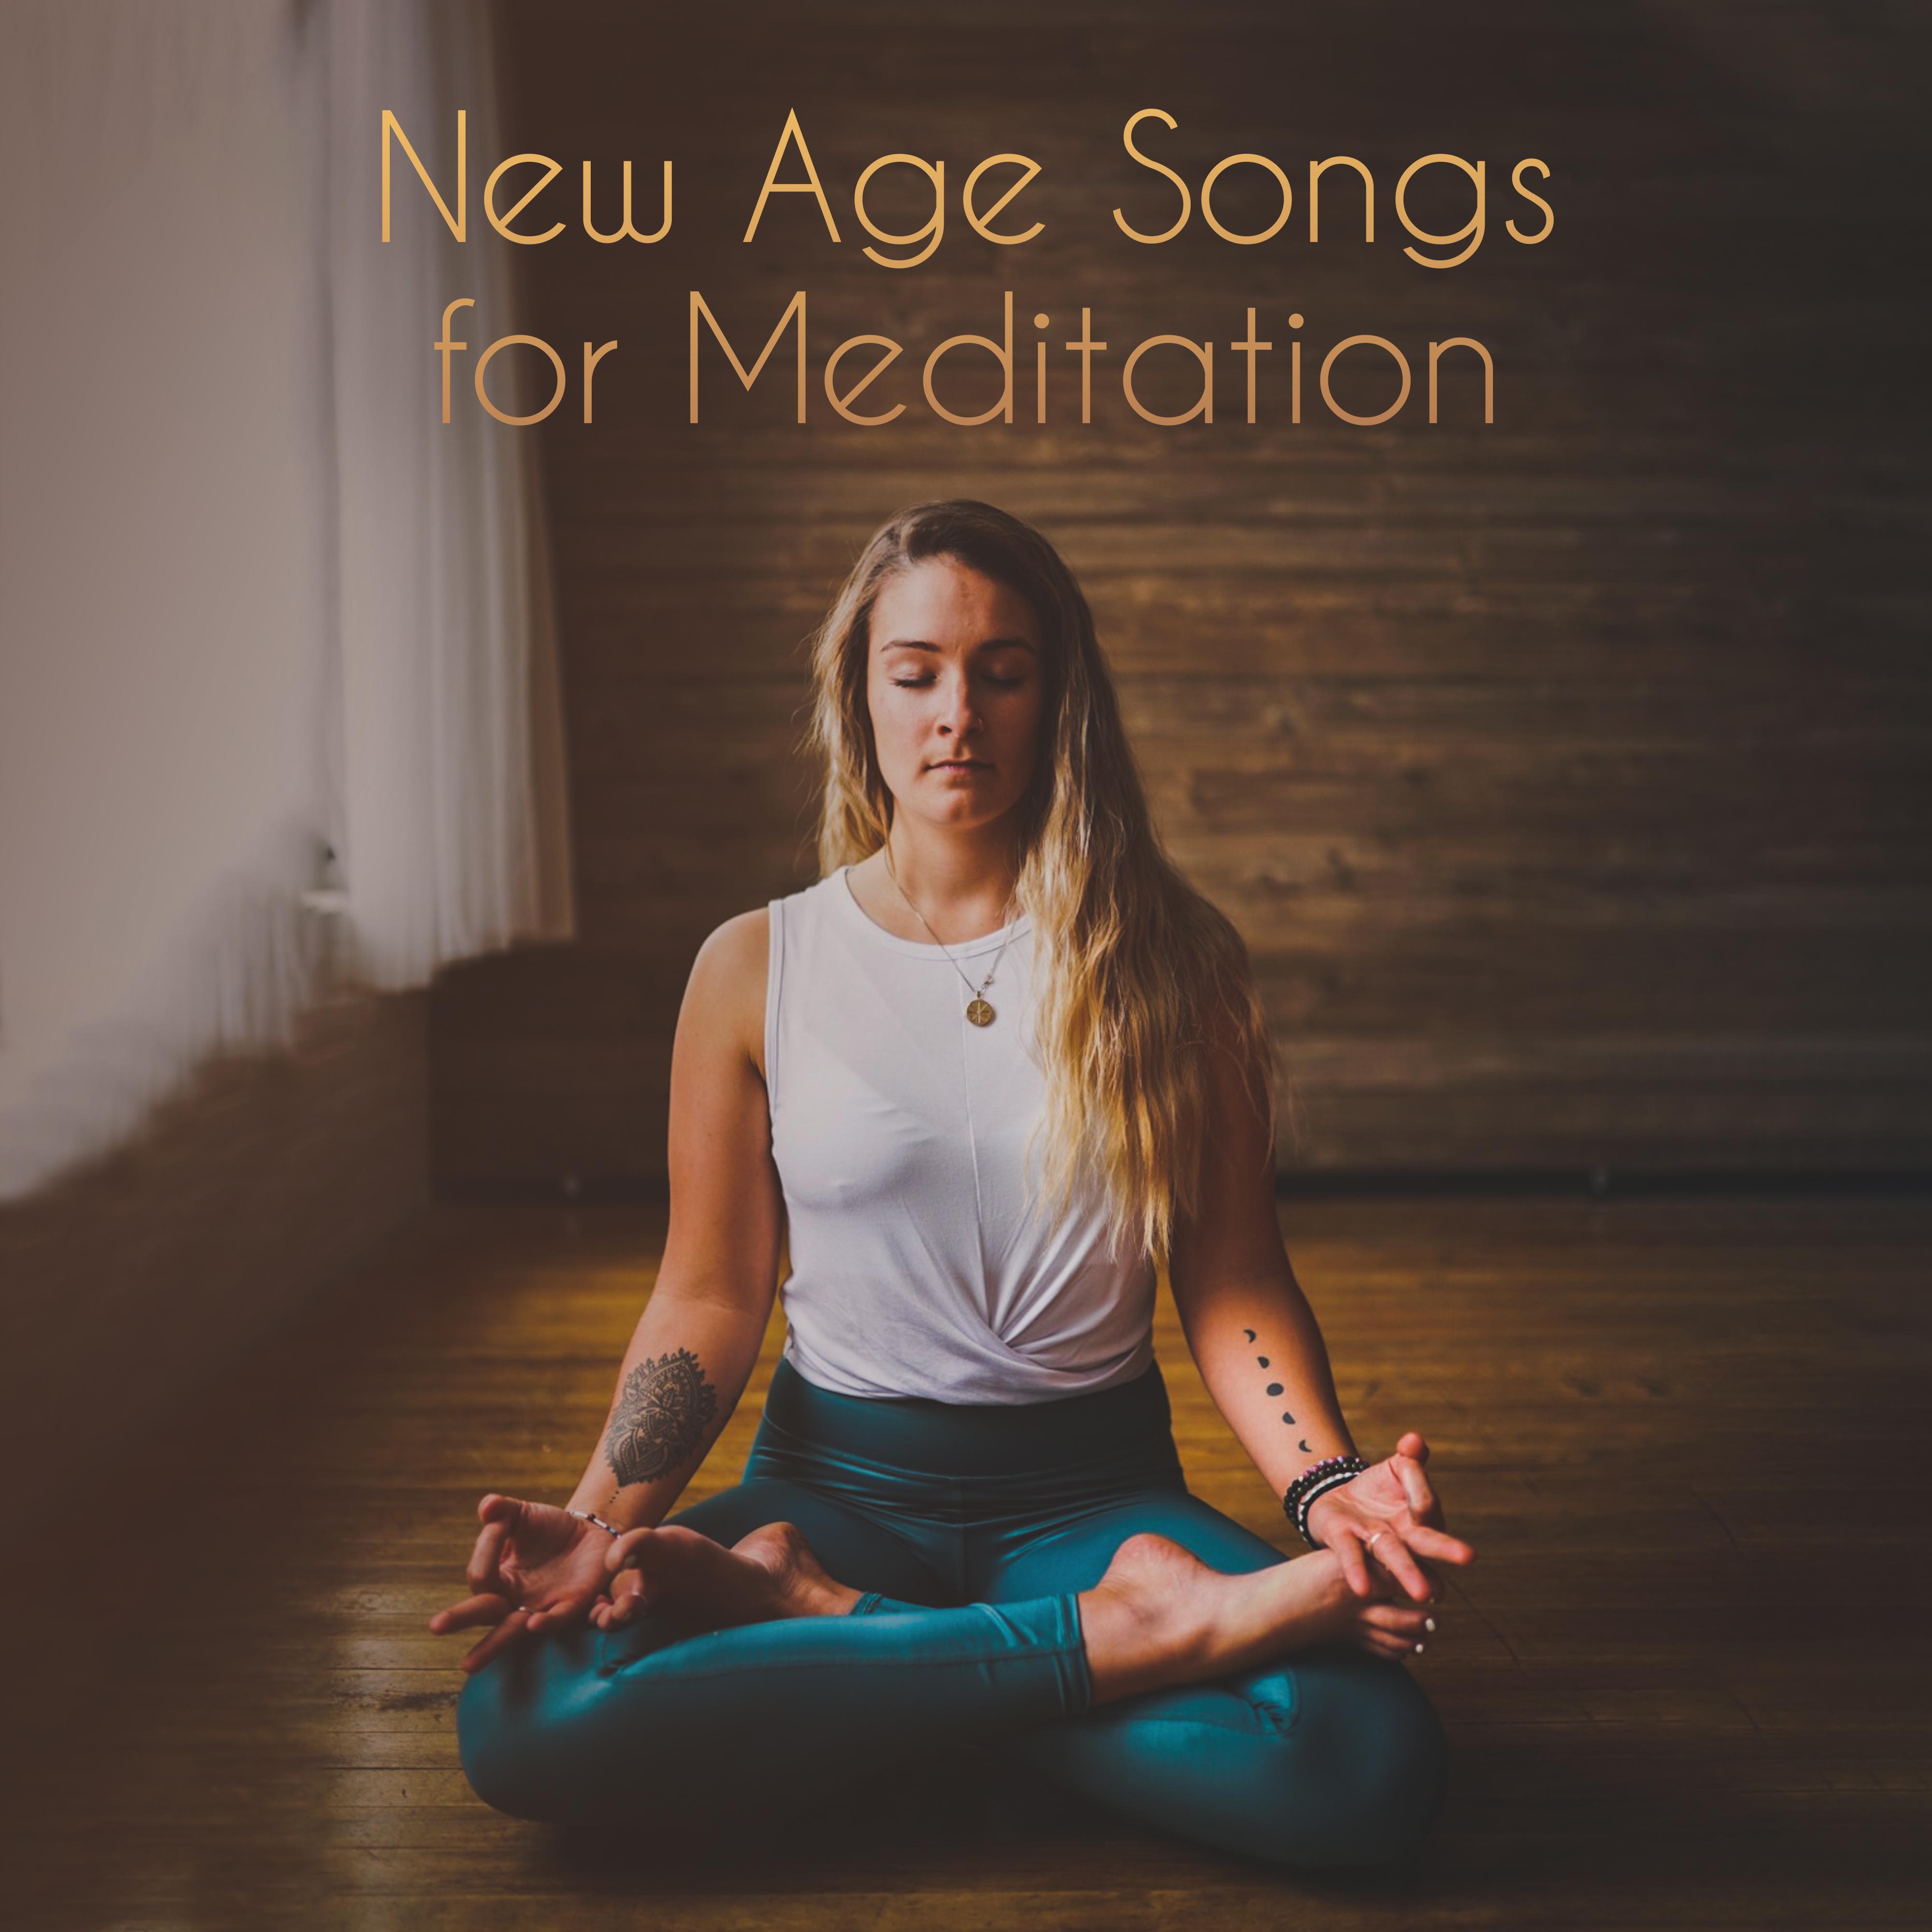 New Age Songs for Meditation  Yoga Music, Deep Harmony, Reduce Stress, Meditation Therapy, New Age Meditation Music, Harmony Yoga Music